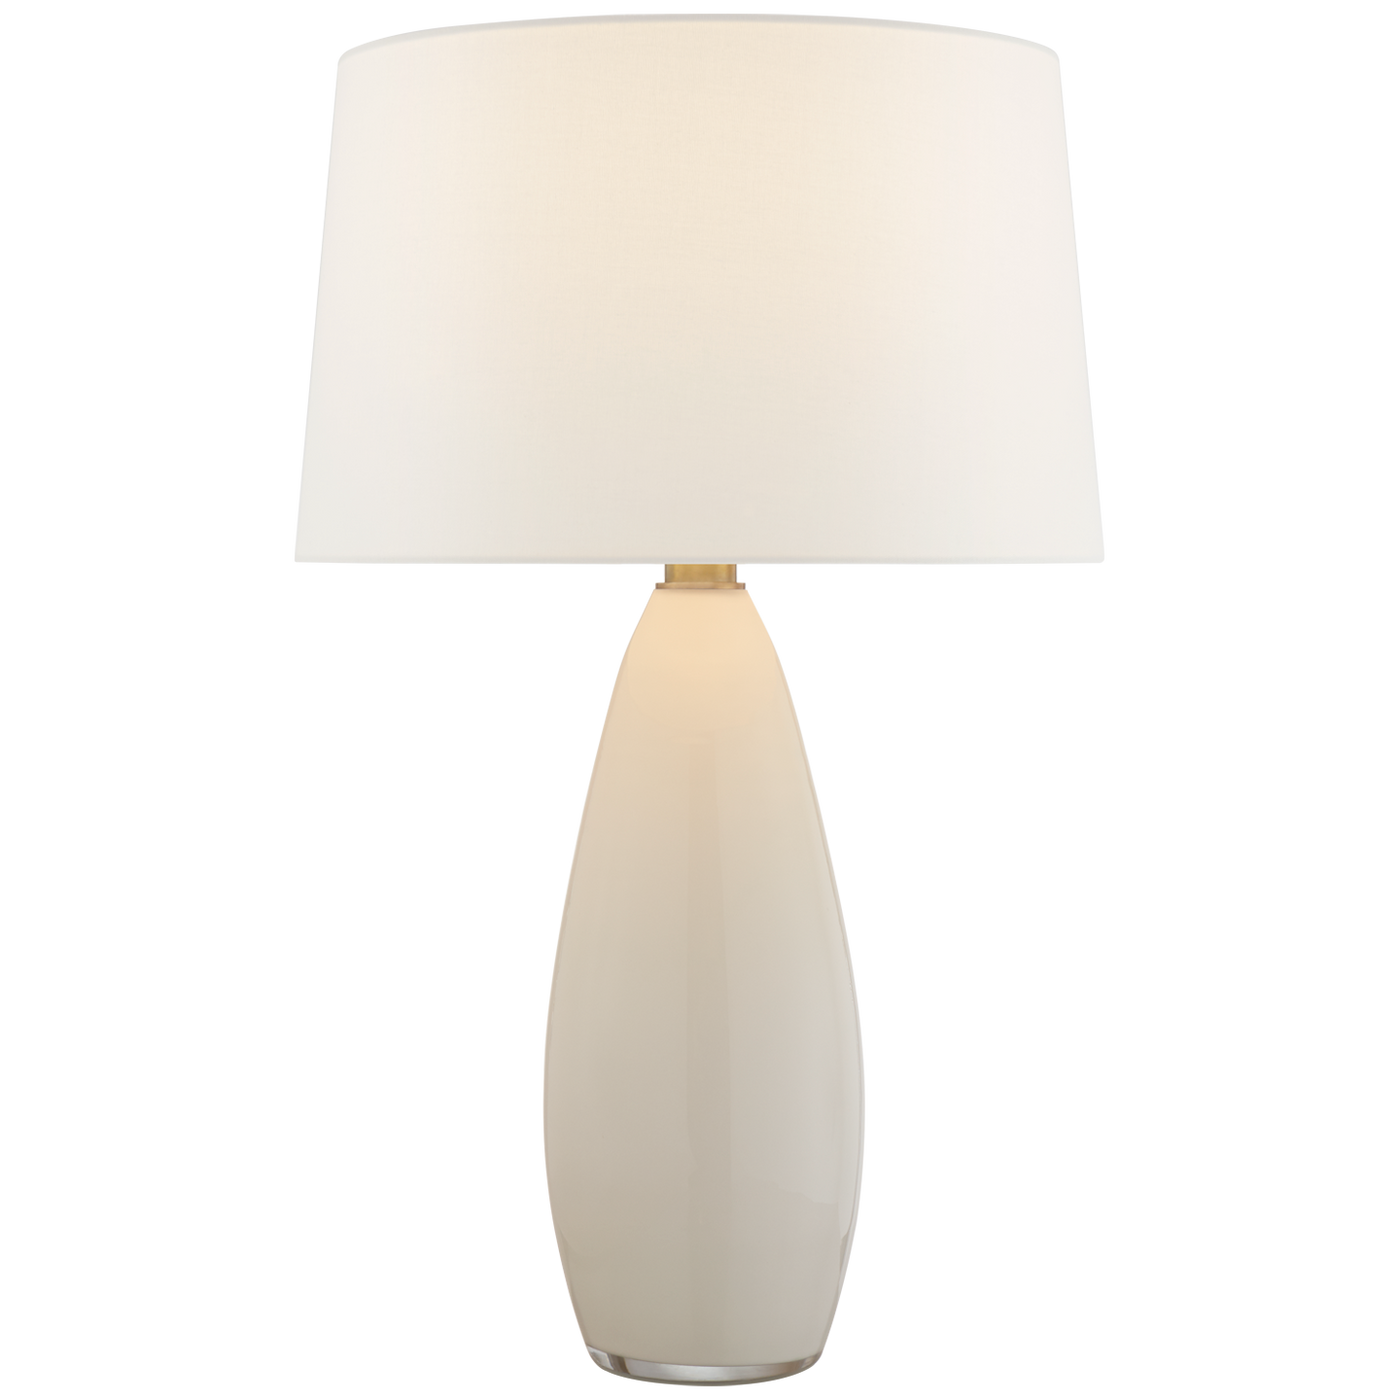 TABLE LAMP WHITE GLASS TALL LARGE